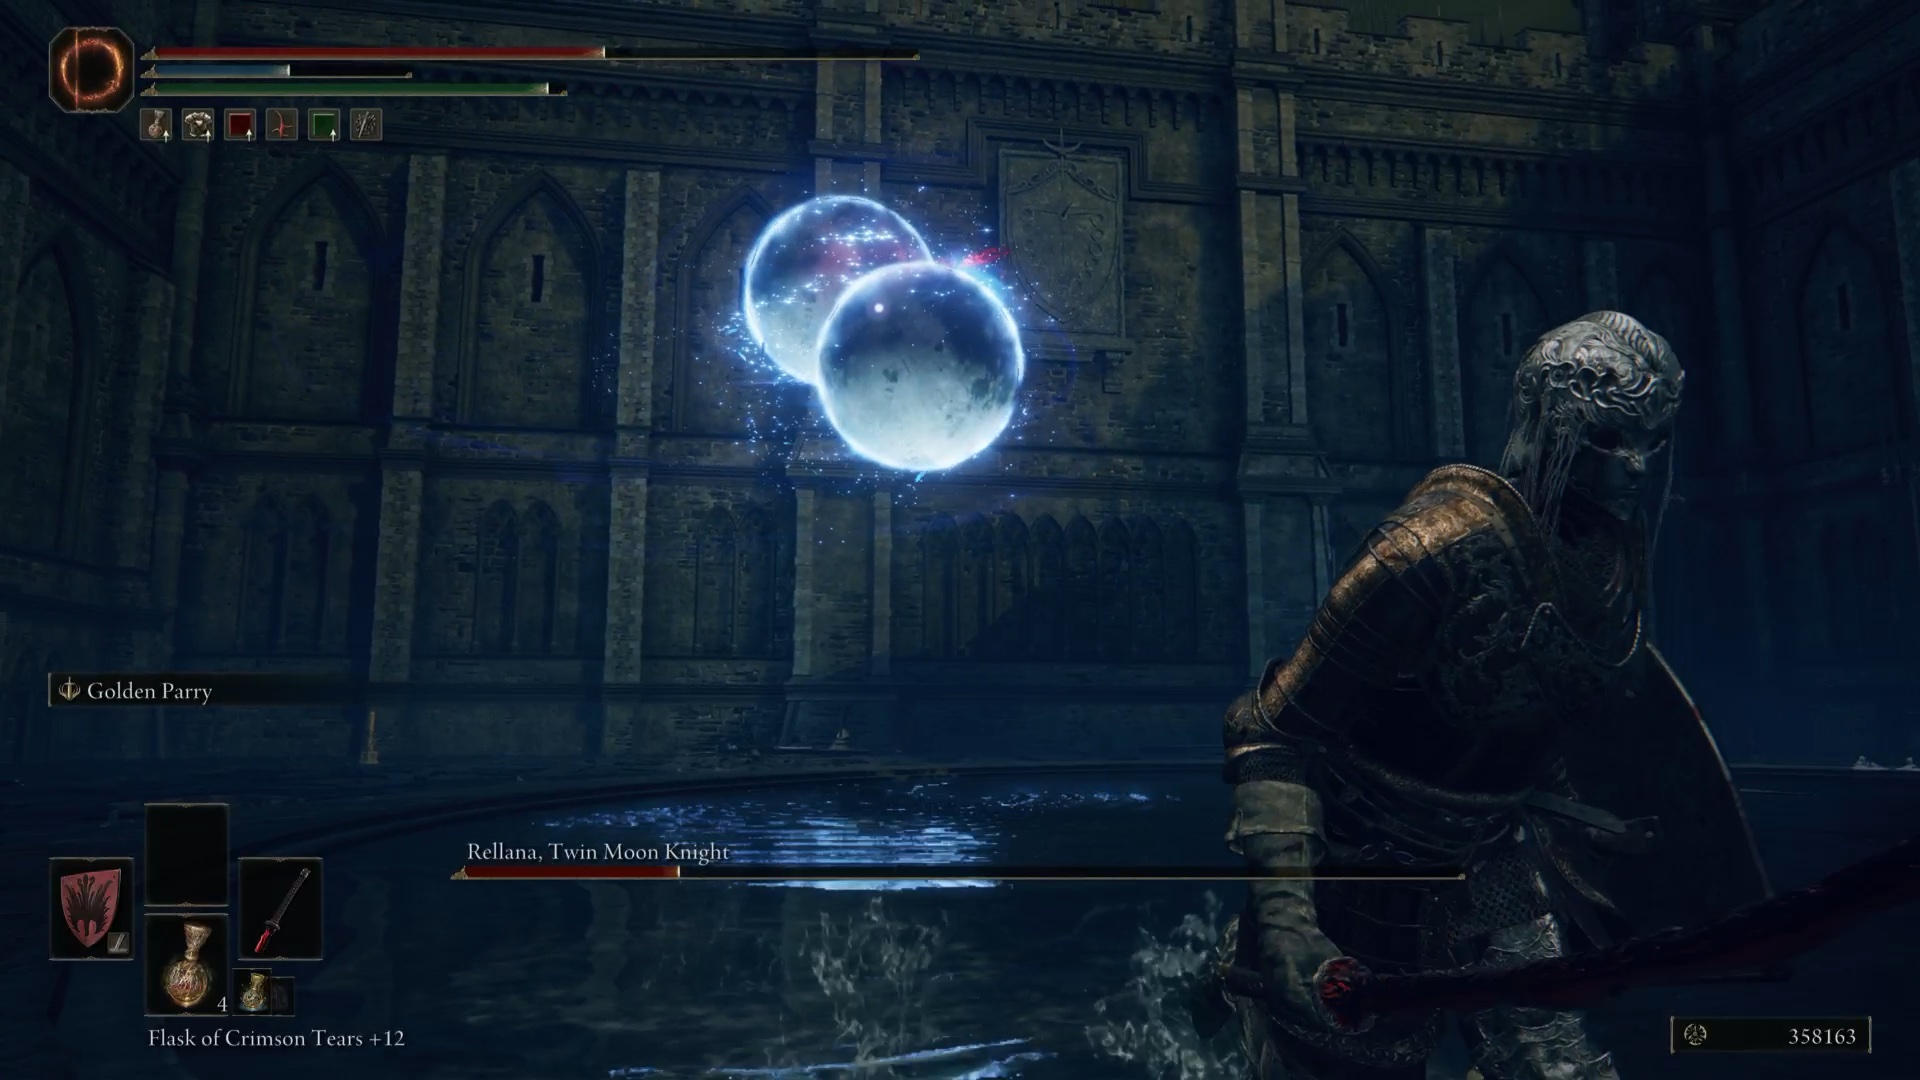 elden ring shadow of the erdtree rellana boss guide - two moons appear in the boss arena